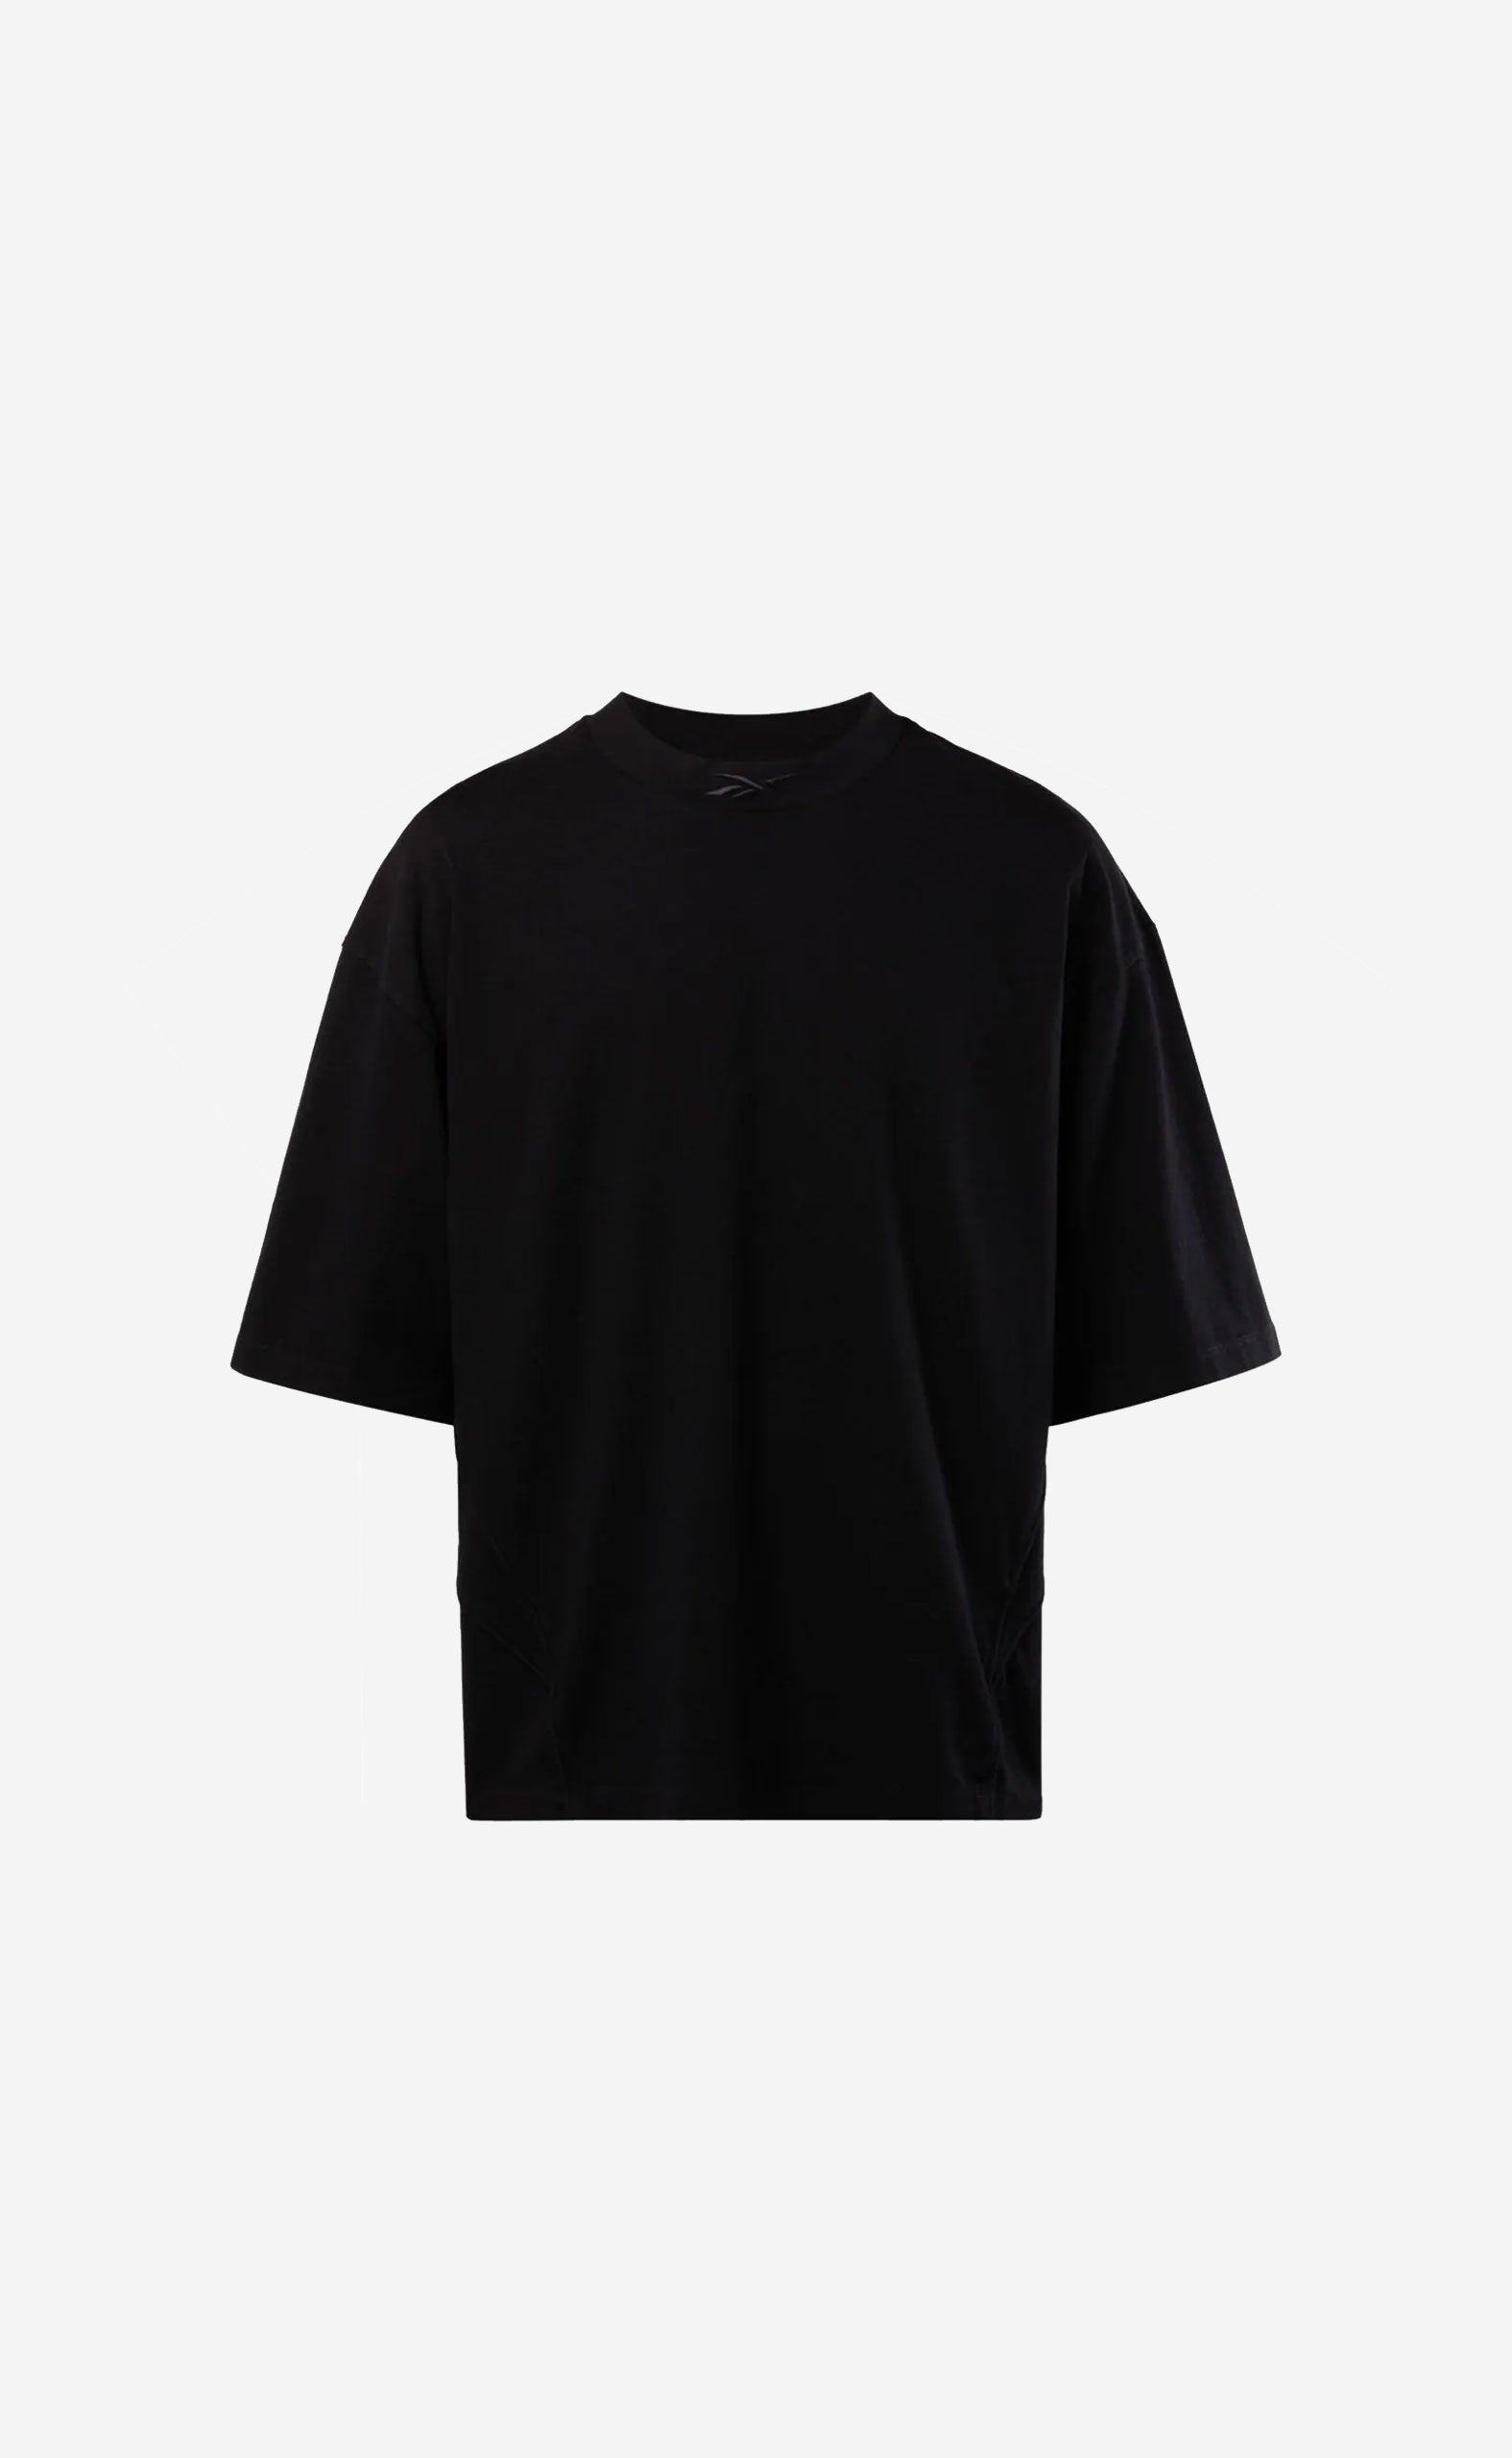 T-SHIRT UNISEX PIPED TEE BLACK